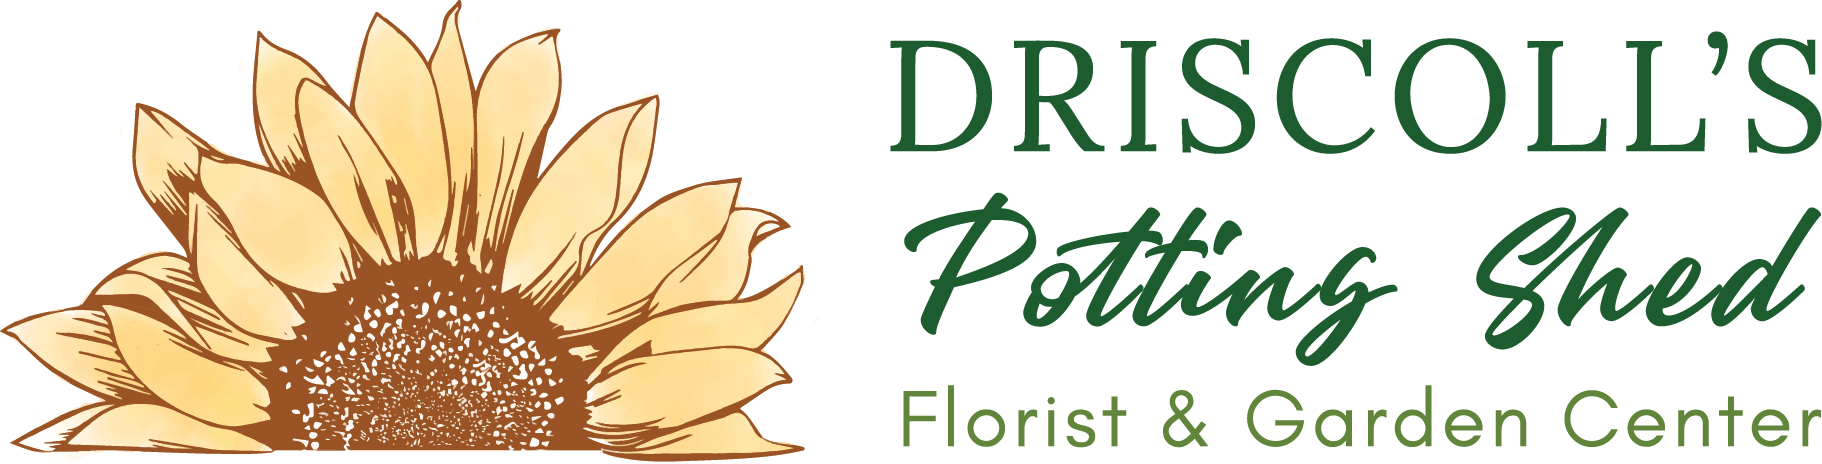 Driscoll's Potting Shed Logo